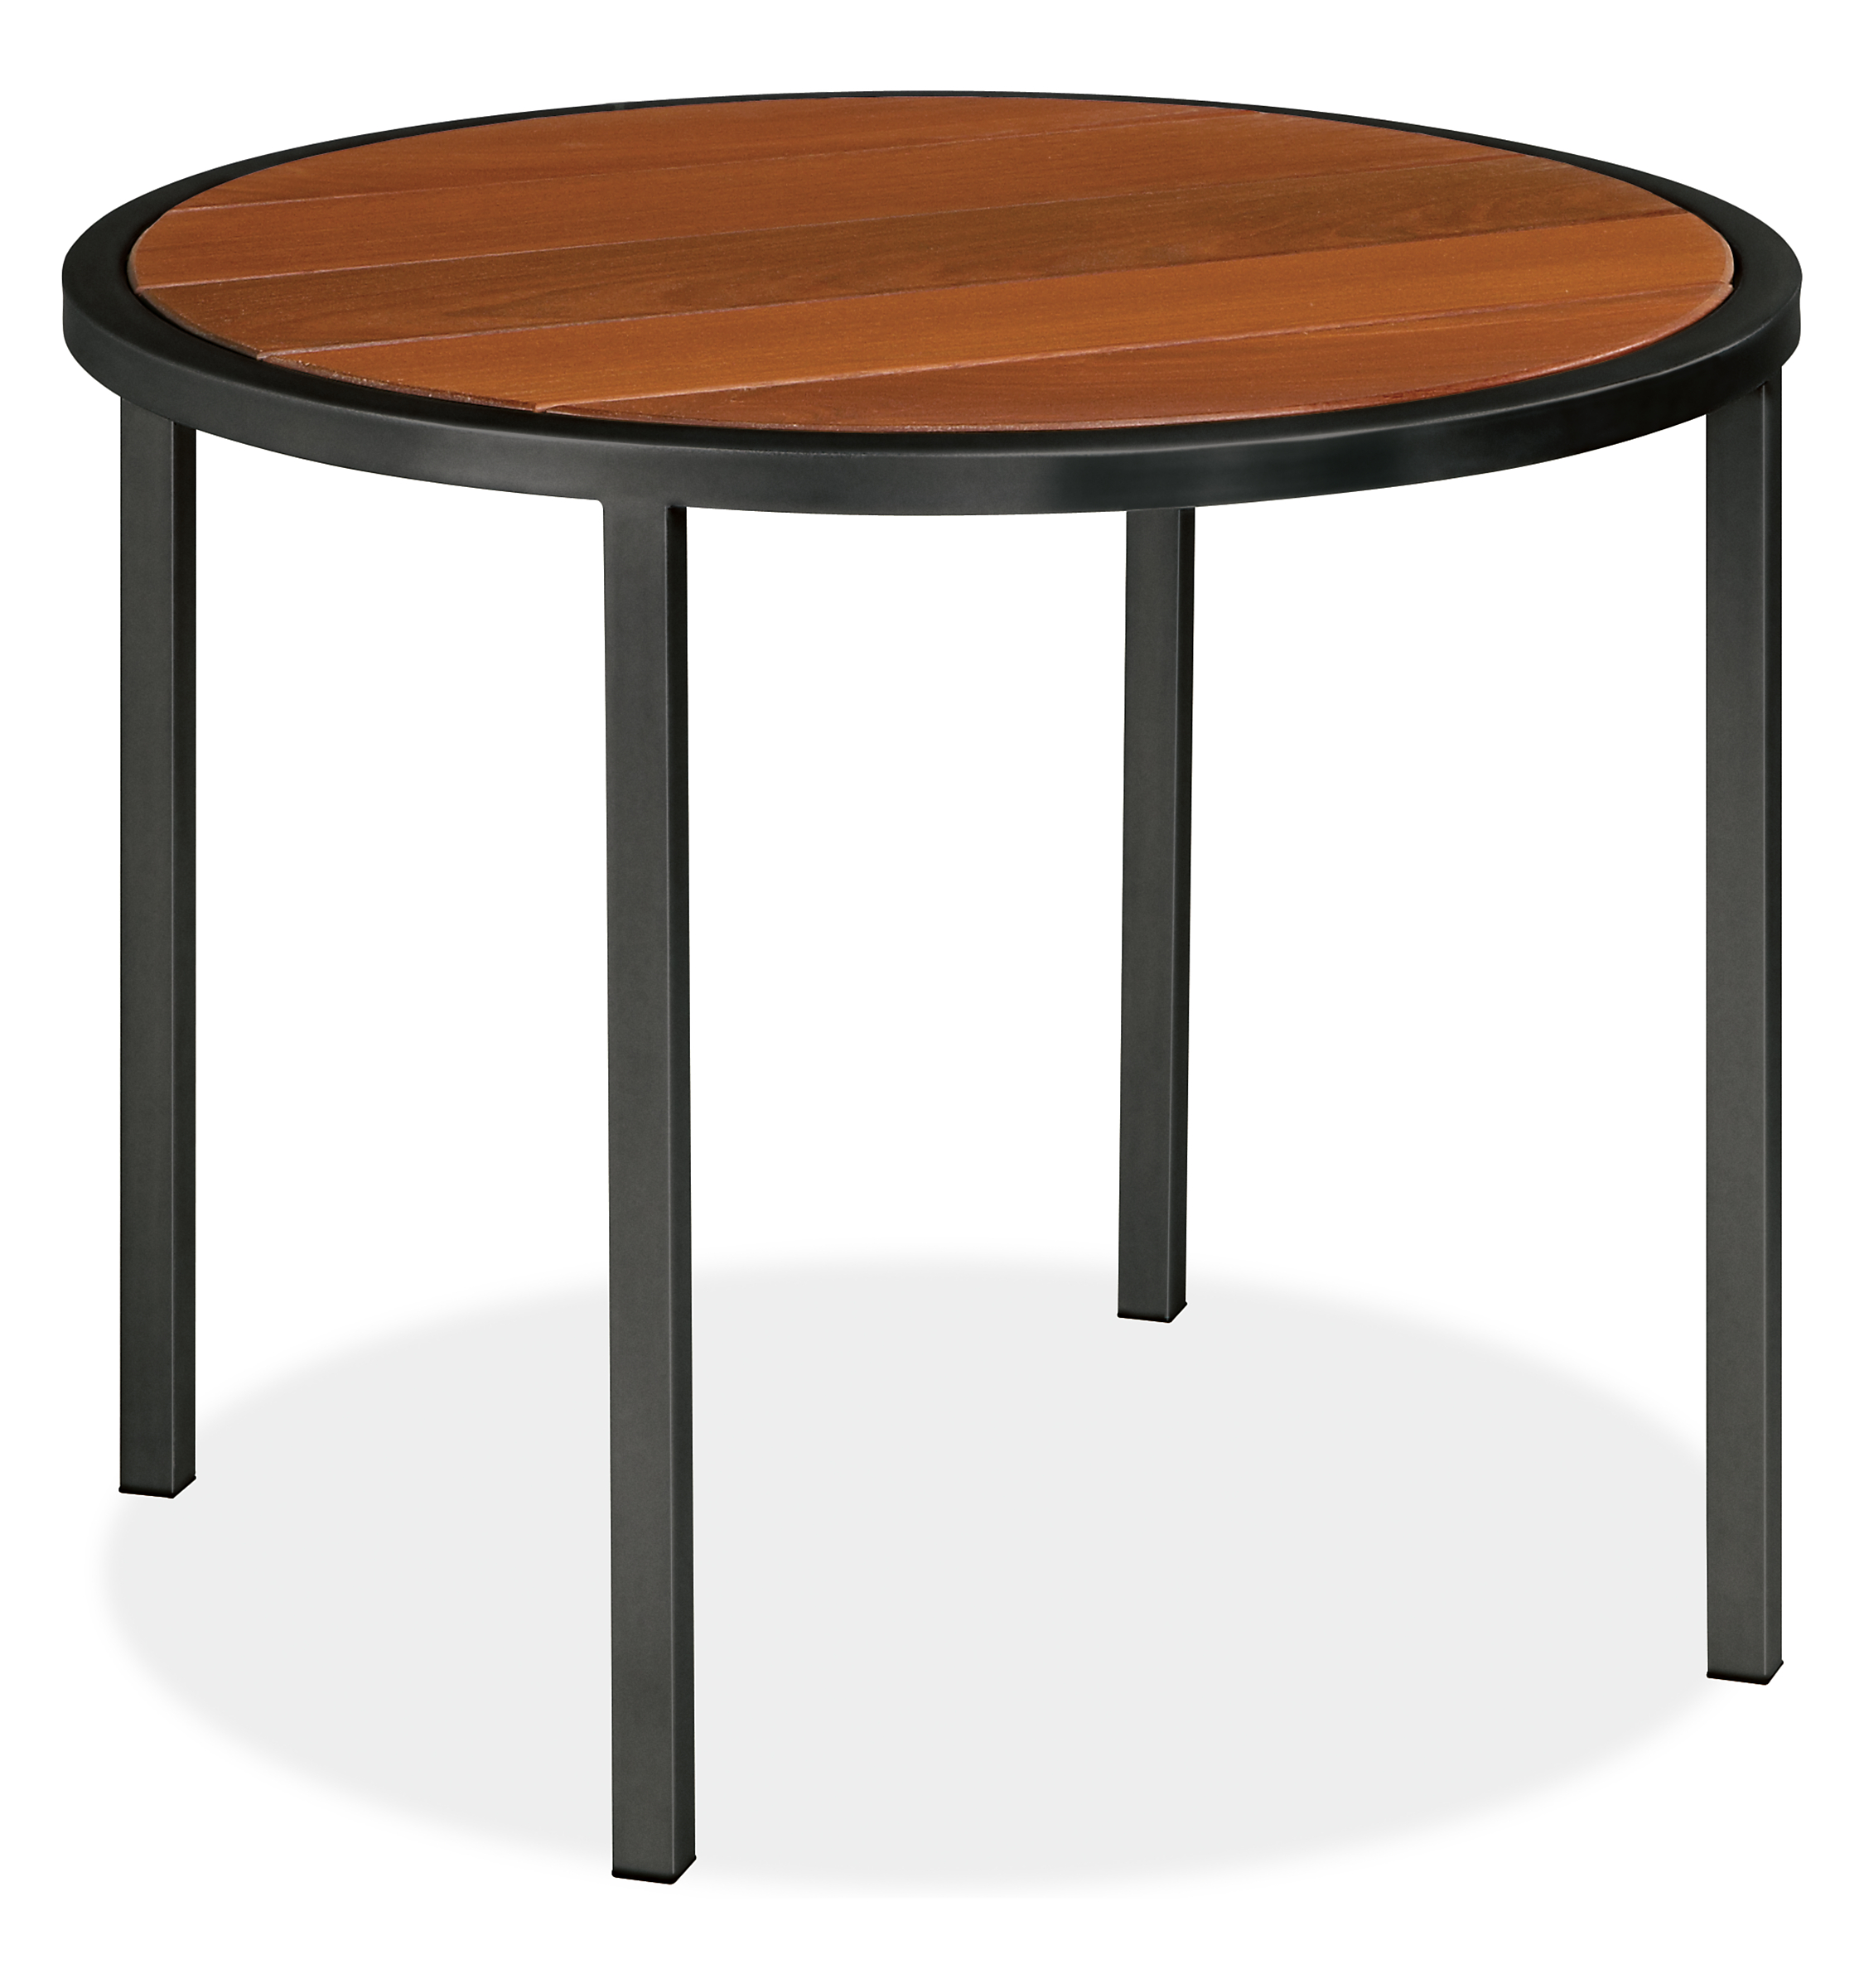 Montego 27 diam 22h Round Side Table in Ipe with Graphite